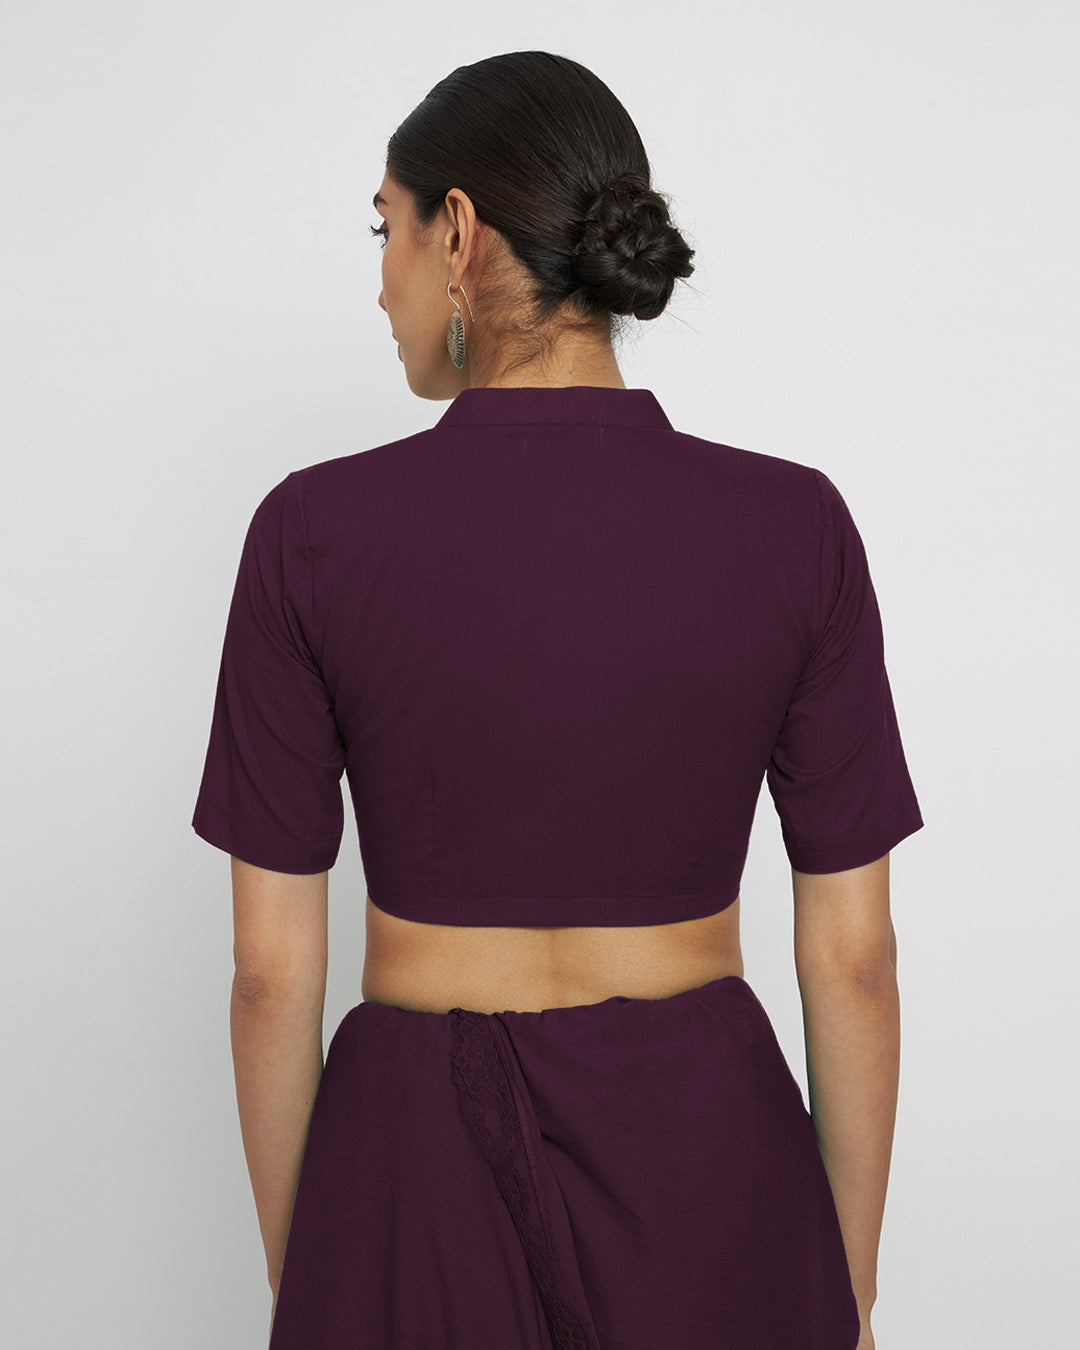 Combo: Plum Passion & Midnight Blue Reinvented Neckline Blouse- Set of 2